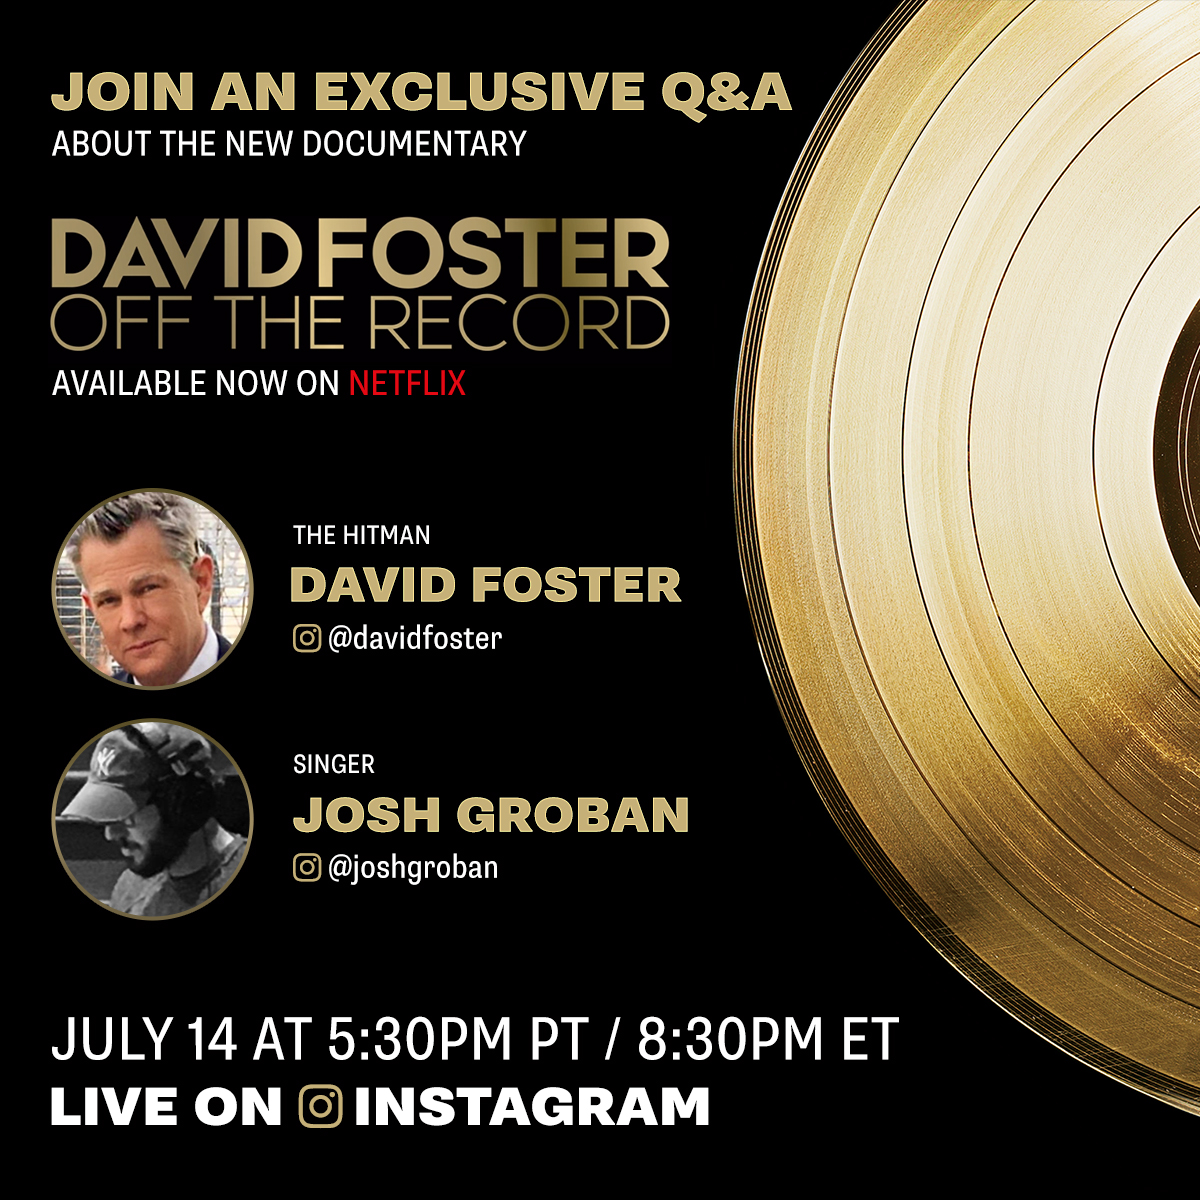 Have questions? Tune in today at 5:30pm PT / 8:30 pm ET for a special conversation with Josh Groban about the new documentary - David Foster: Off The Record, now available on Netflix. #davidfosterofftherecord #netflixdocumentary #netflixmovie